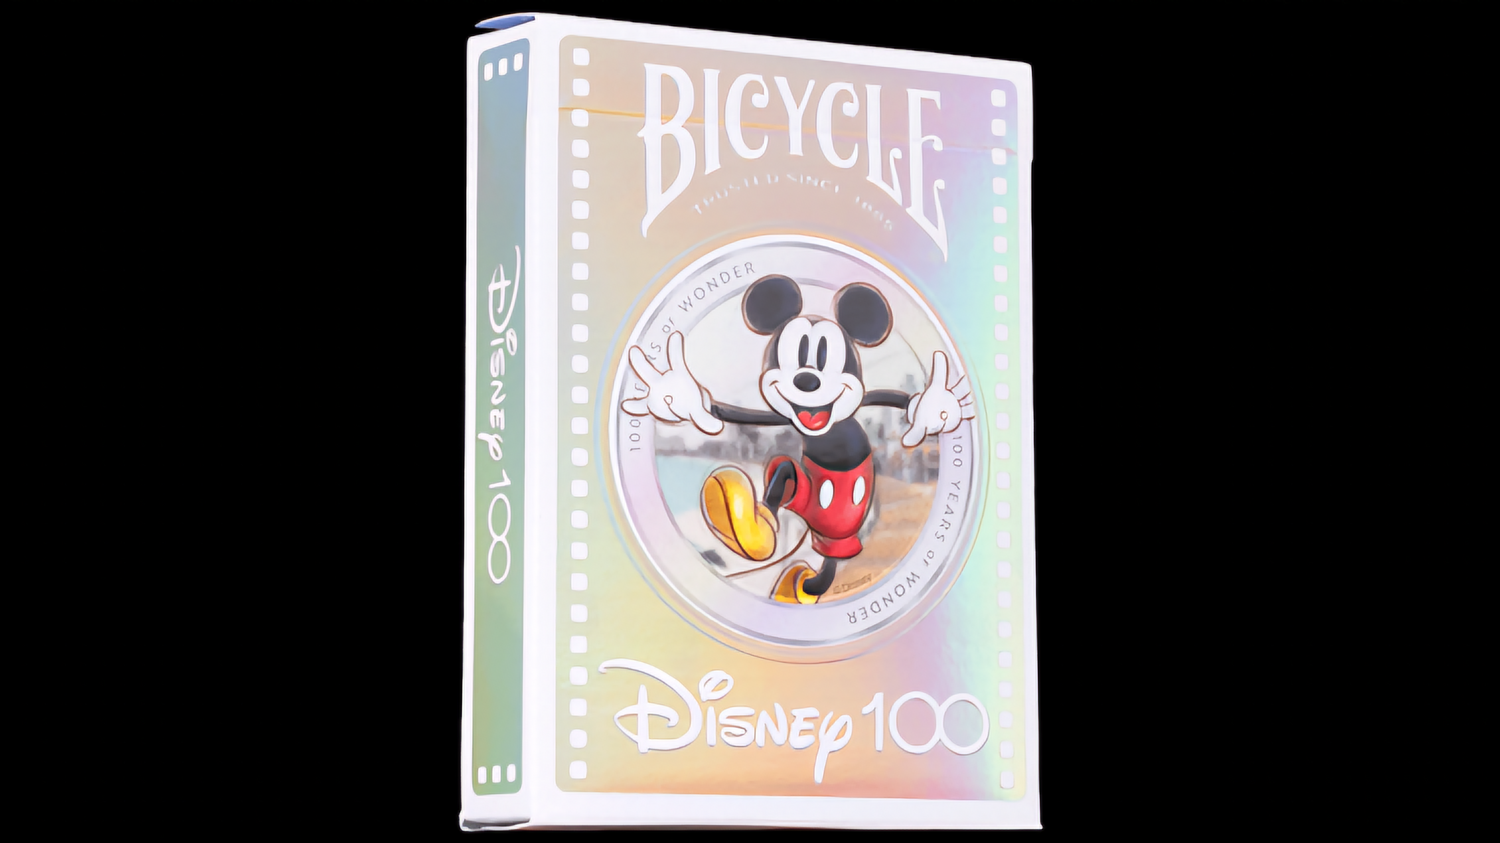 Bicycle Disney 100 Anniversary : Playing Cards, Poker, Magic, Cardistry,singapore